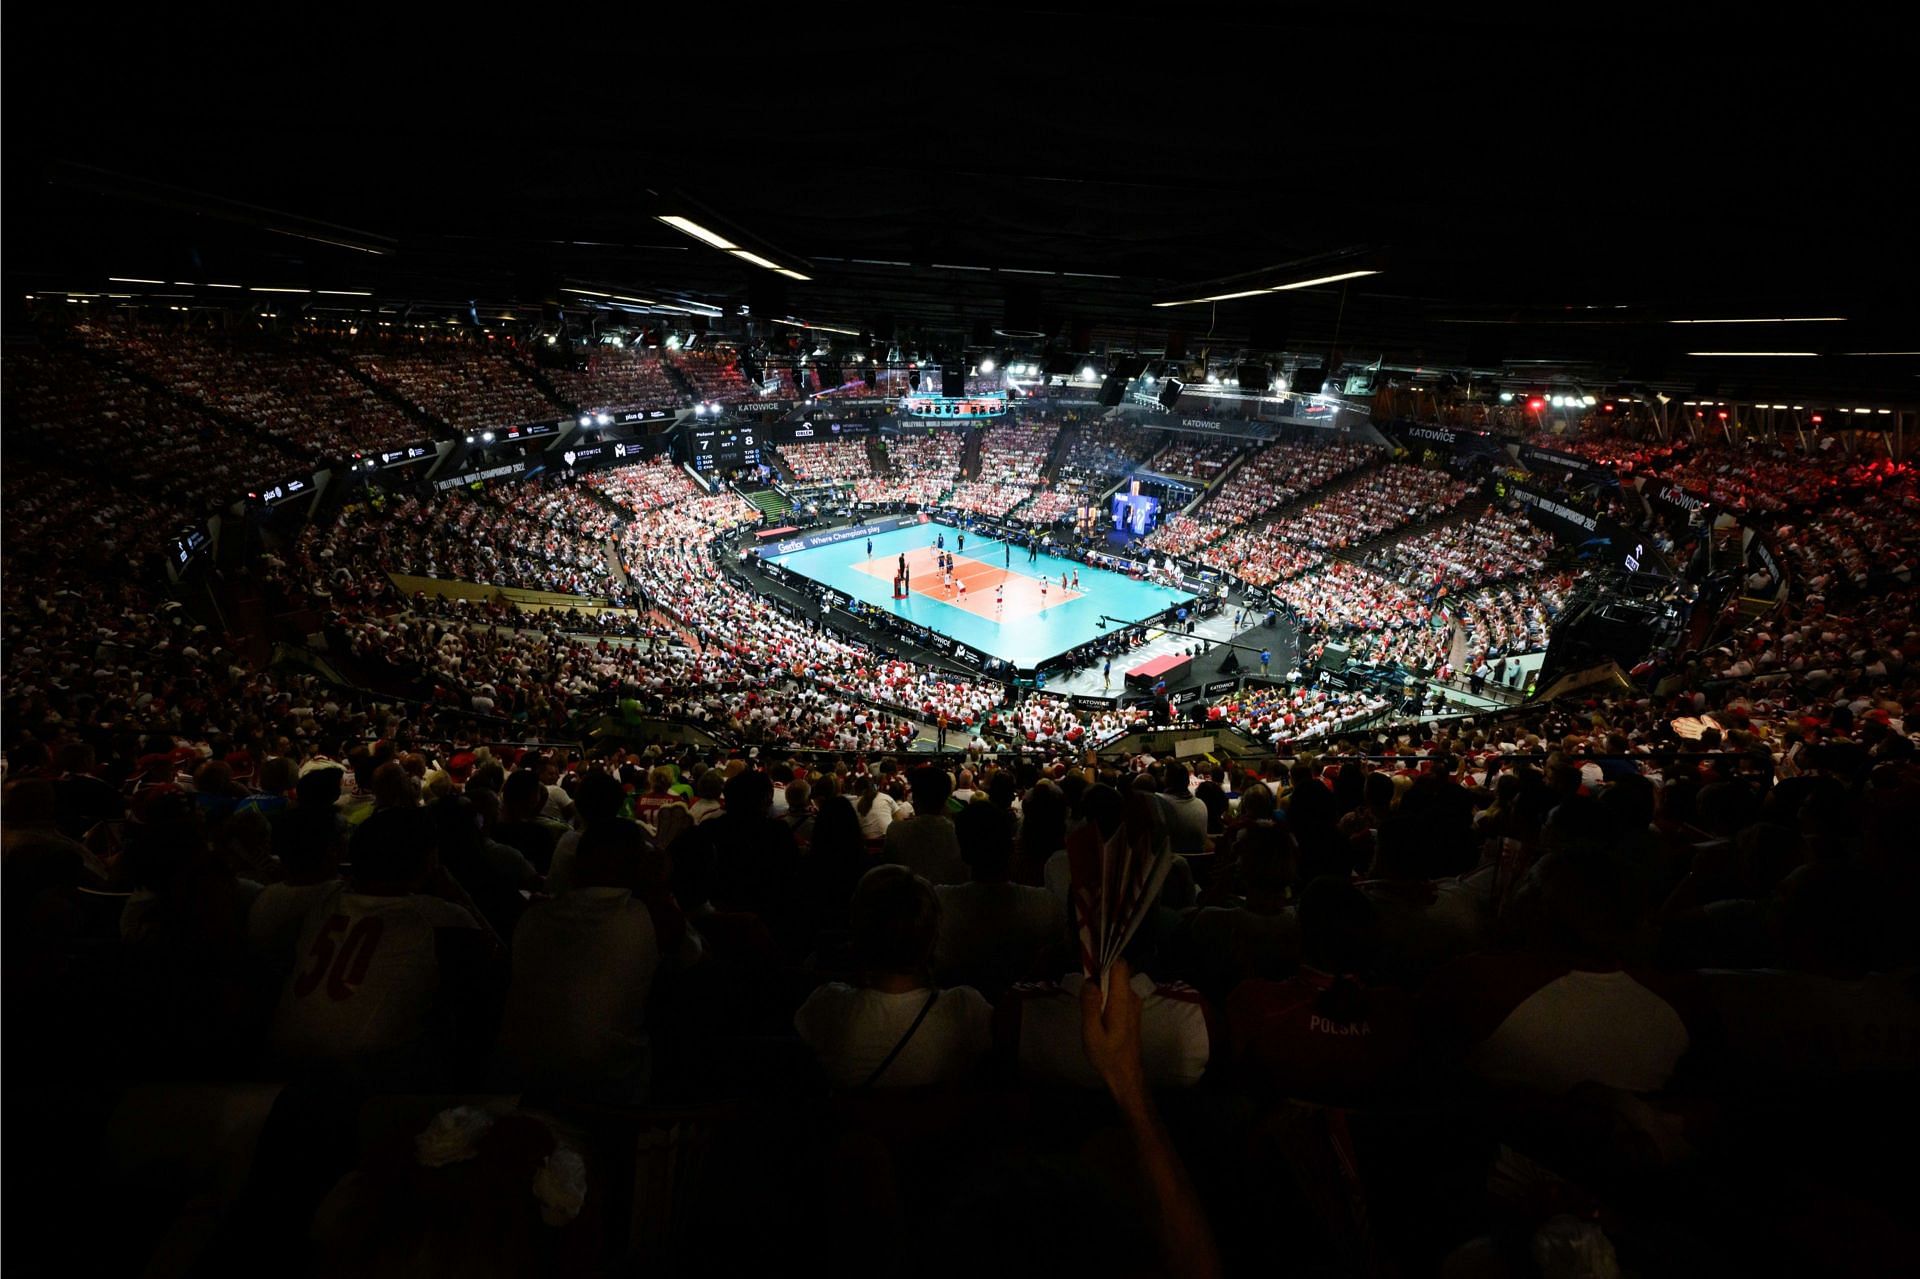 A packed stadium on the final day of the international volleyball tournament (Image via Volleyball World)